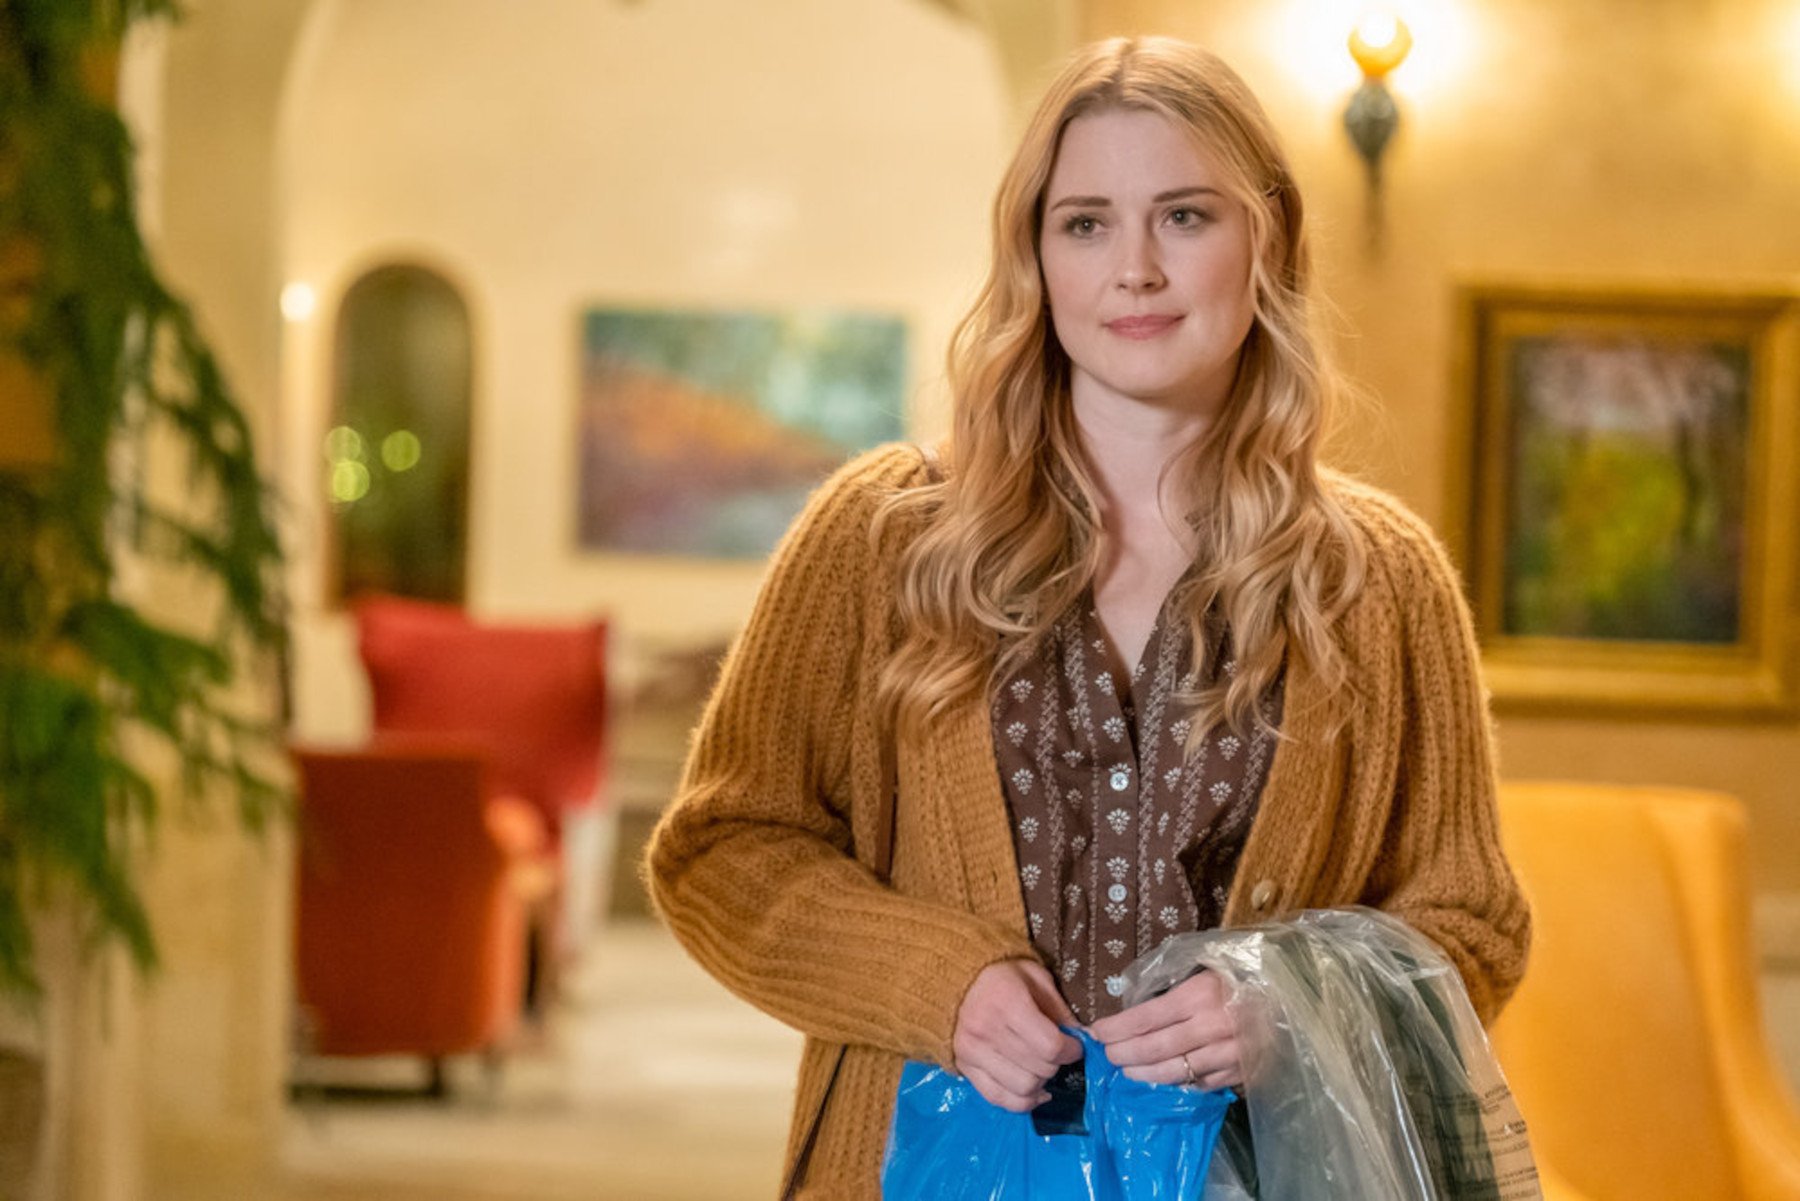 Alexandra Breckenridge as Sophie Inman in 'This Is Us' Season 6. She's wearing a yellow cardigan, holding a bag and jacket, and smiling.